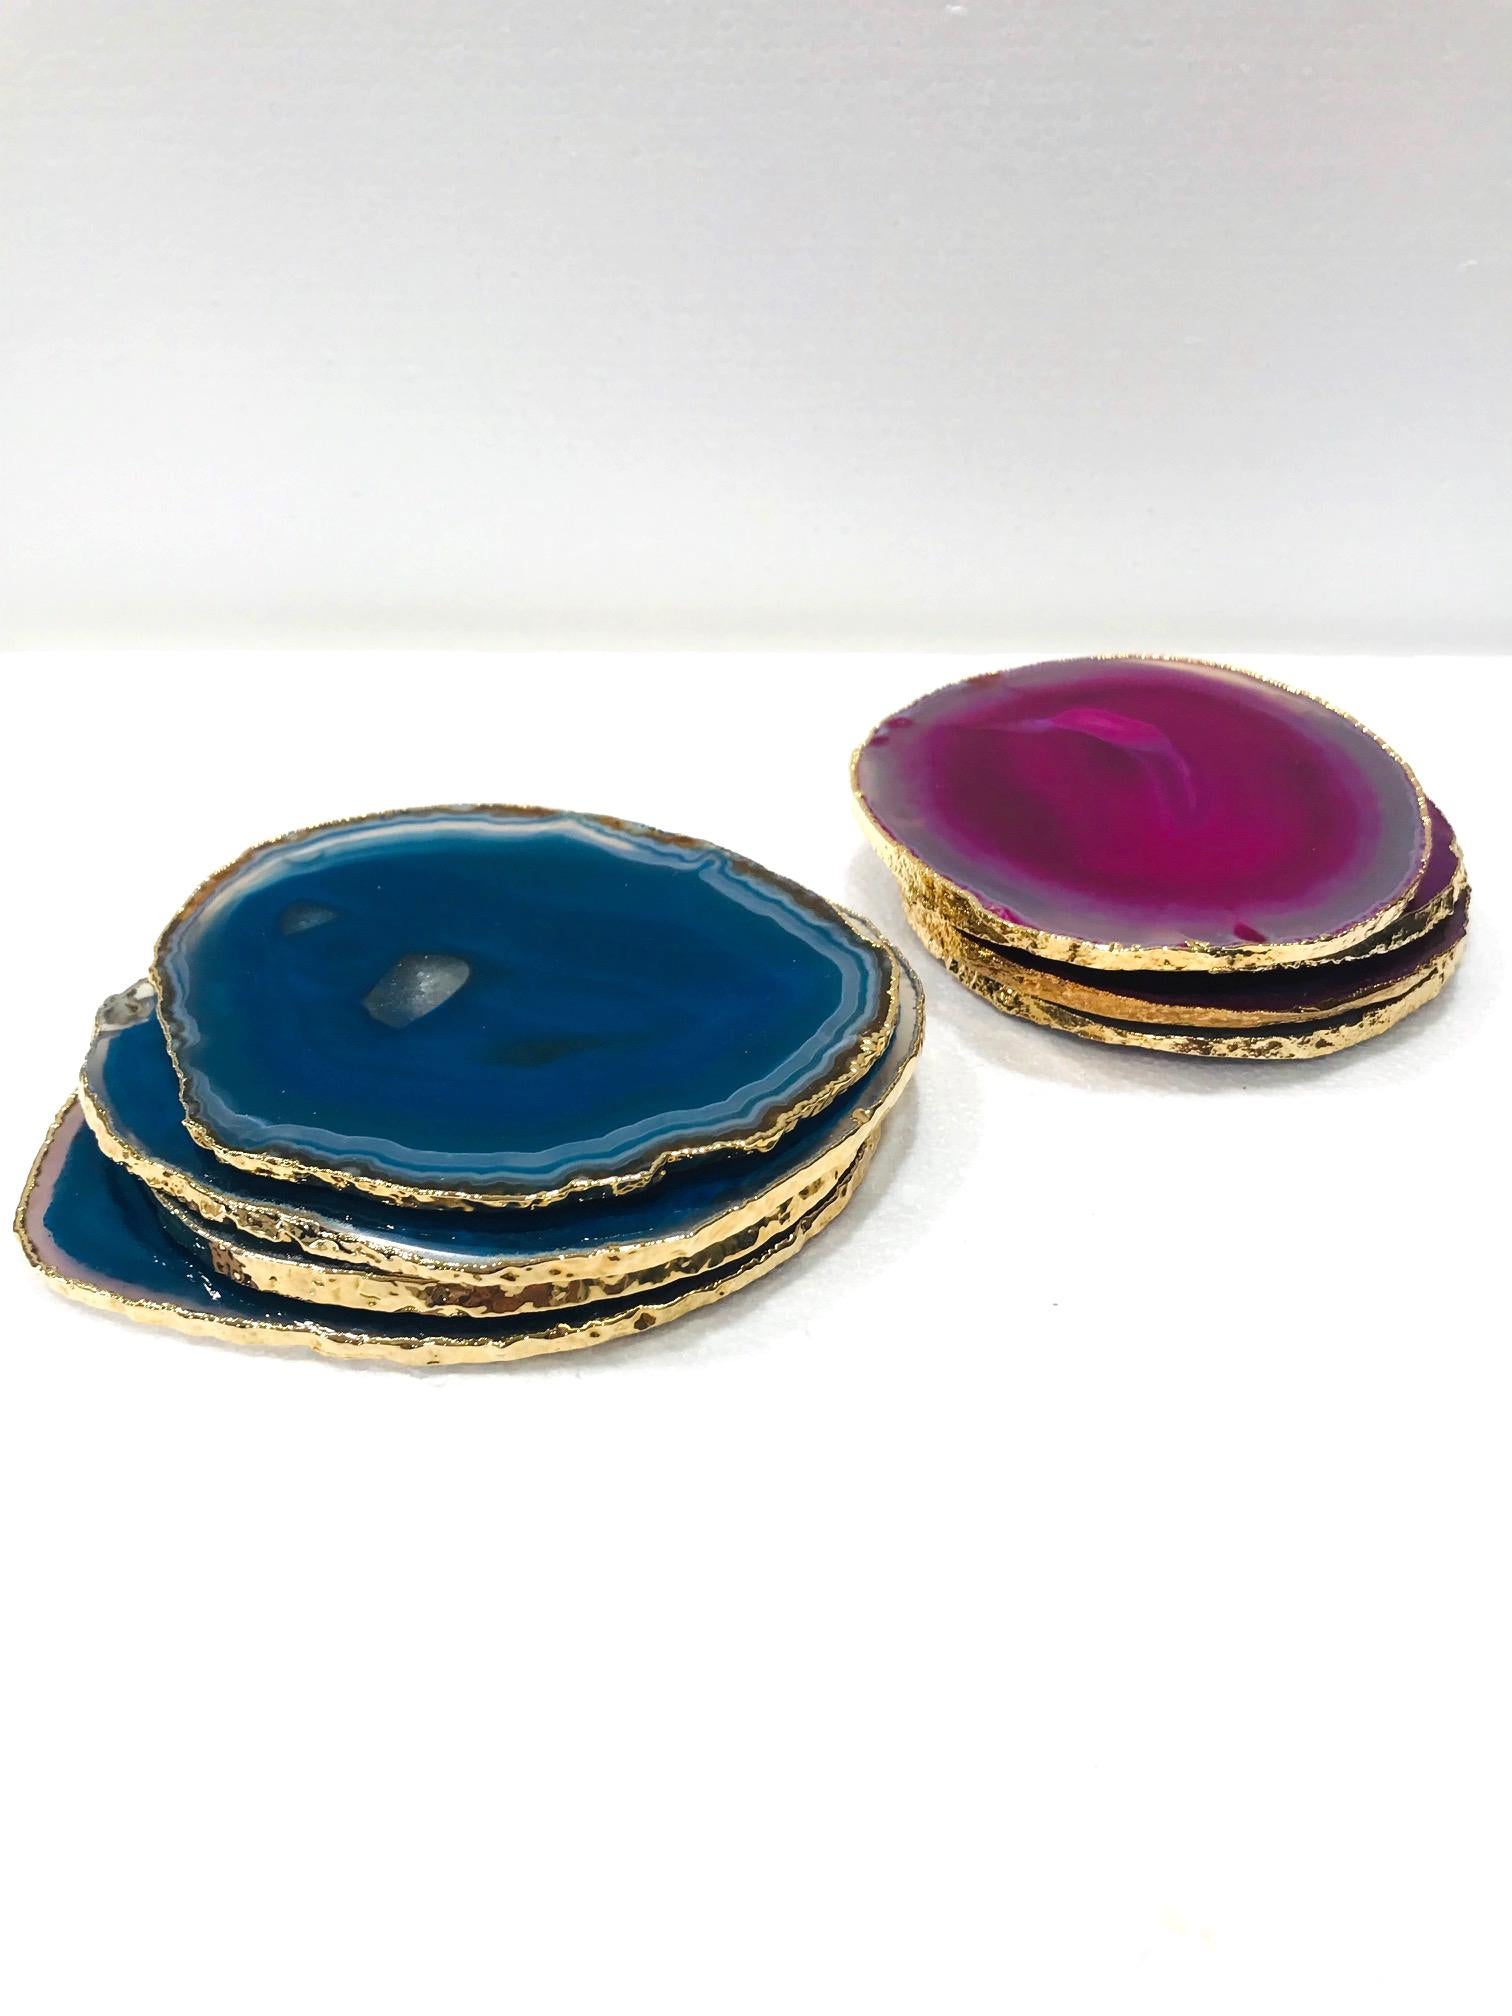 Organic Modern Semi-Precious Gemstone Coasters in Pink and Turquoise with 24k Gold Trim, Set /8 For Sale